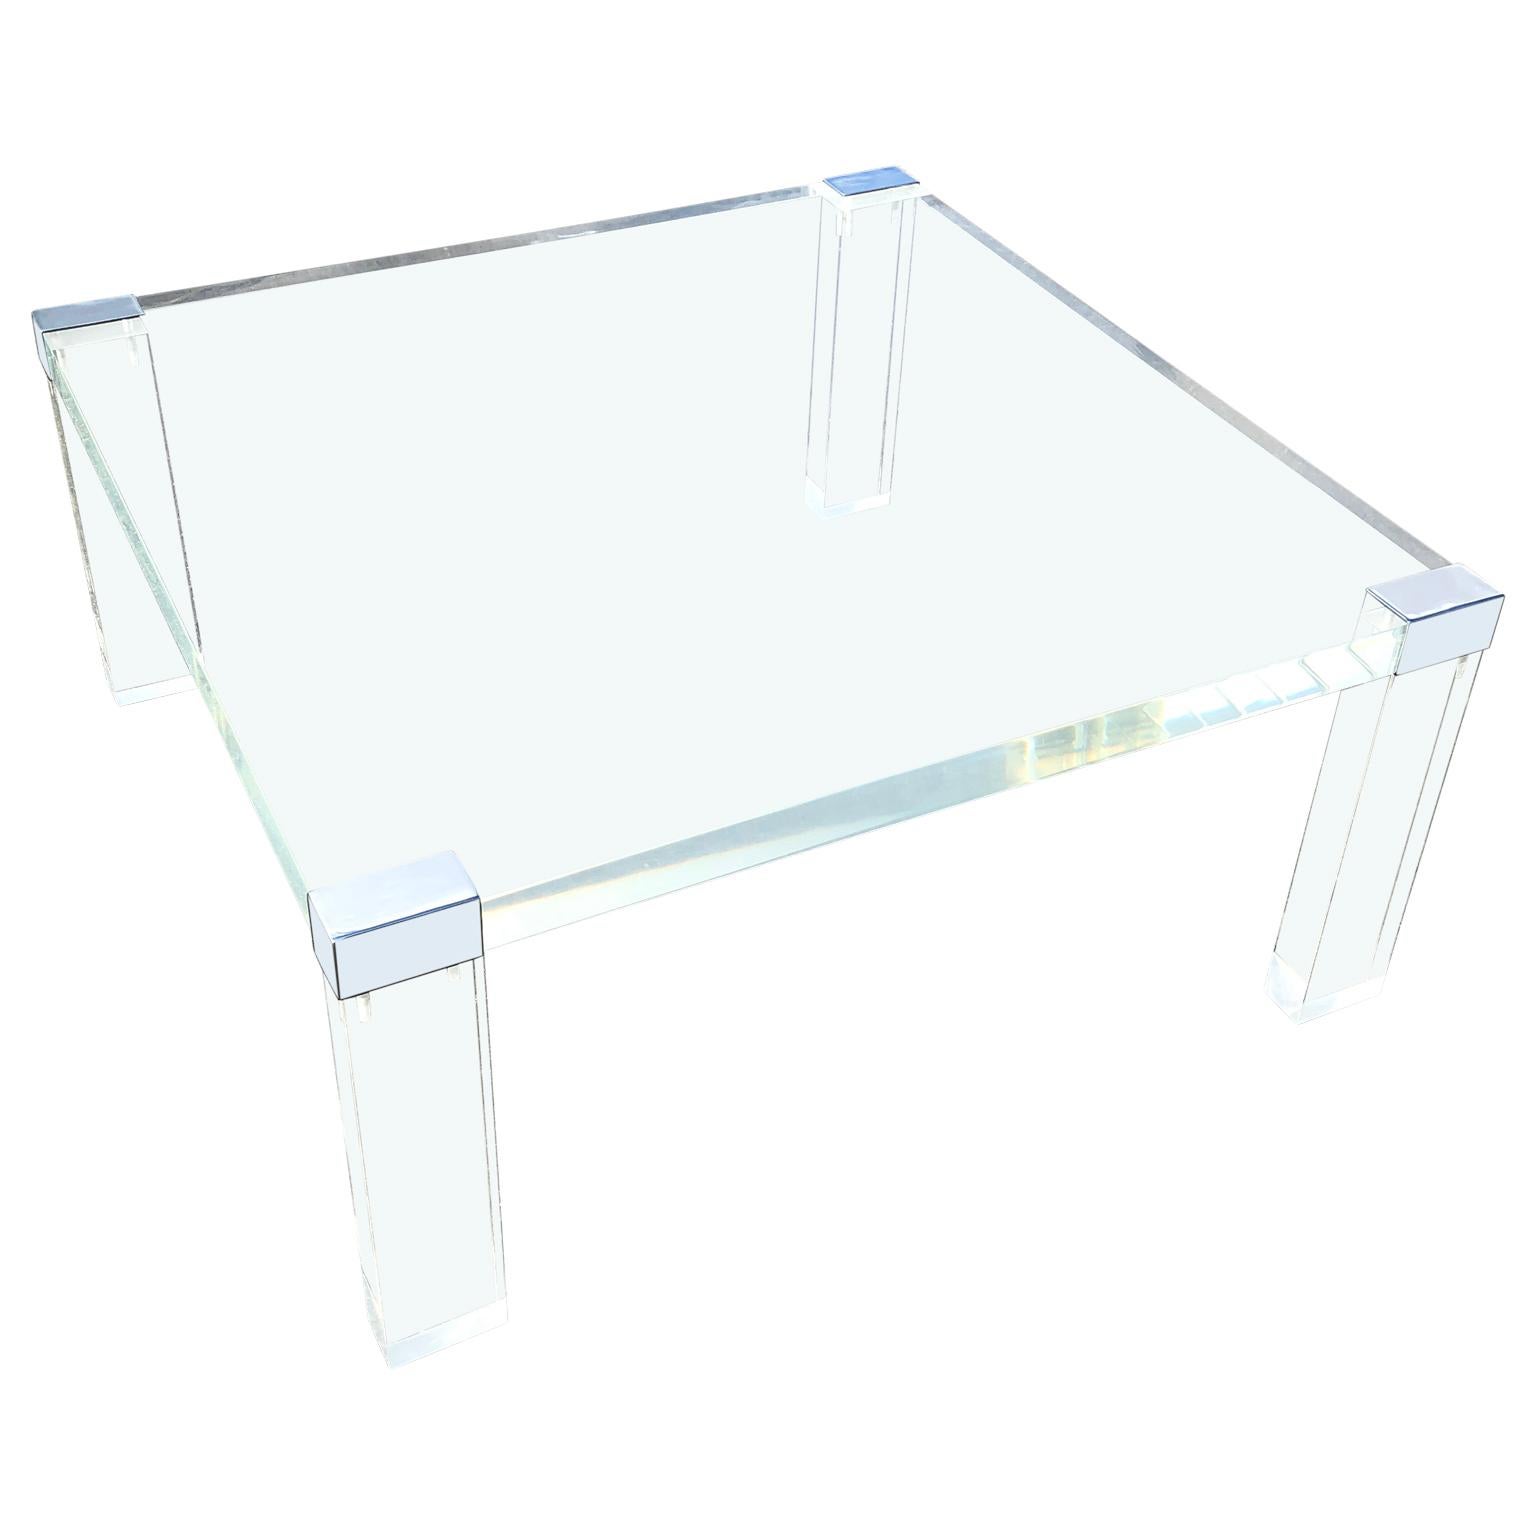 20th Century Italian Square Lucite And Chrome Coffee Or Cocktail Table